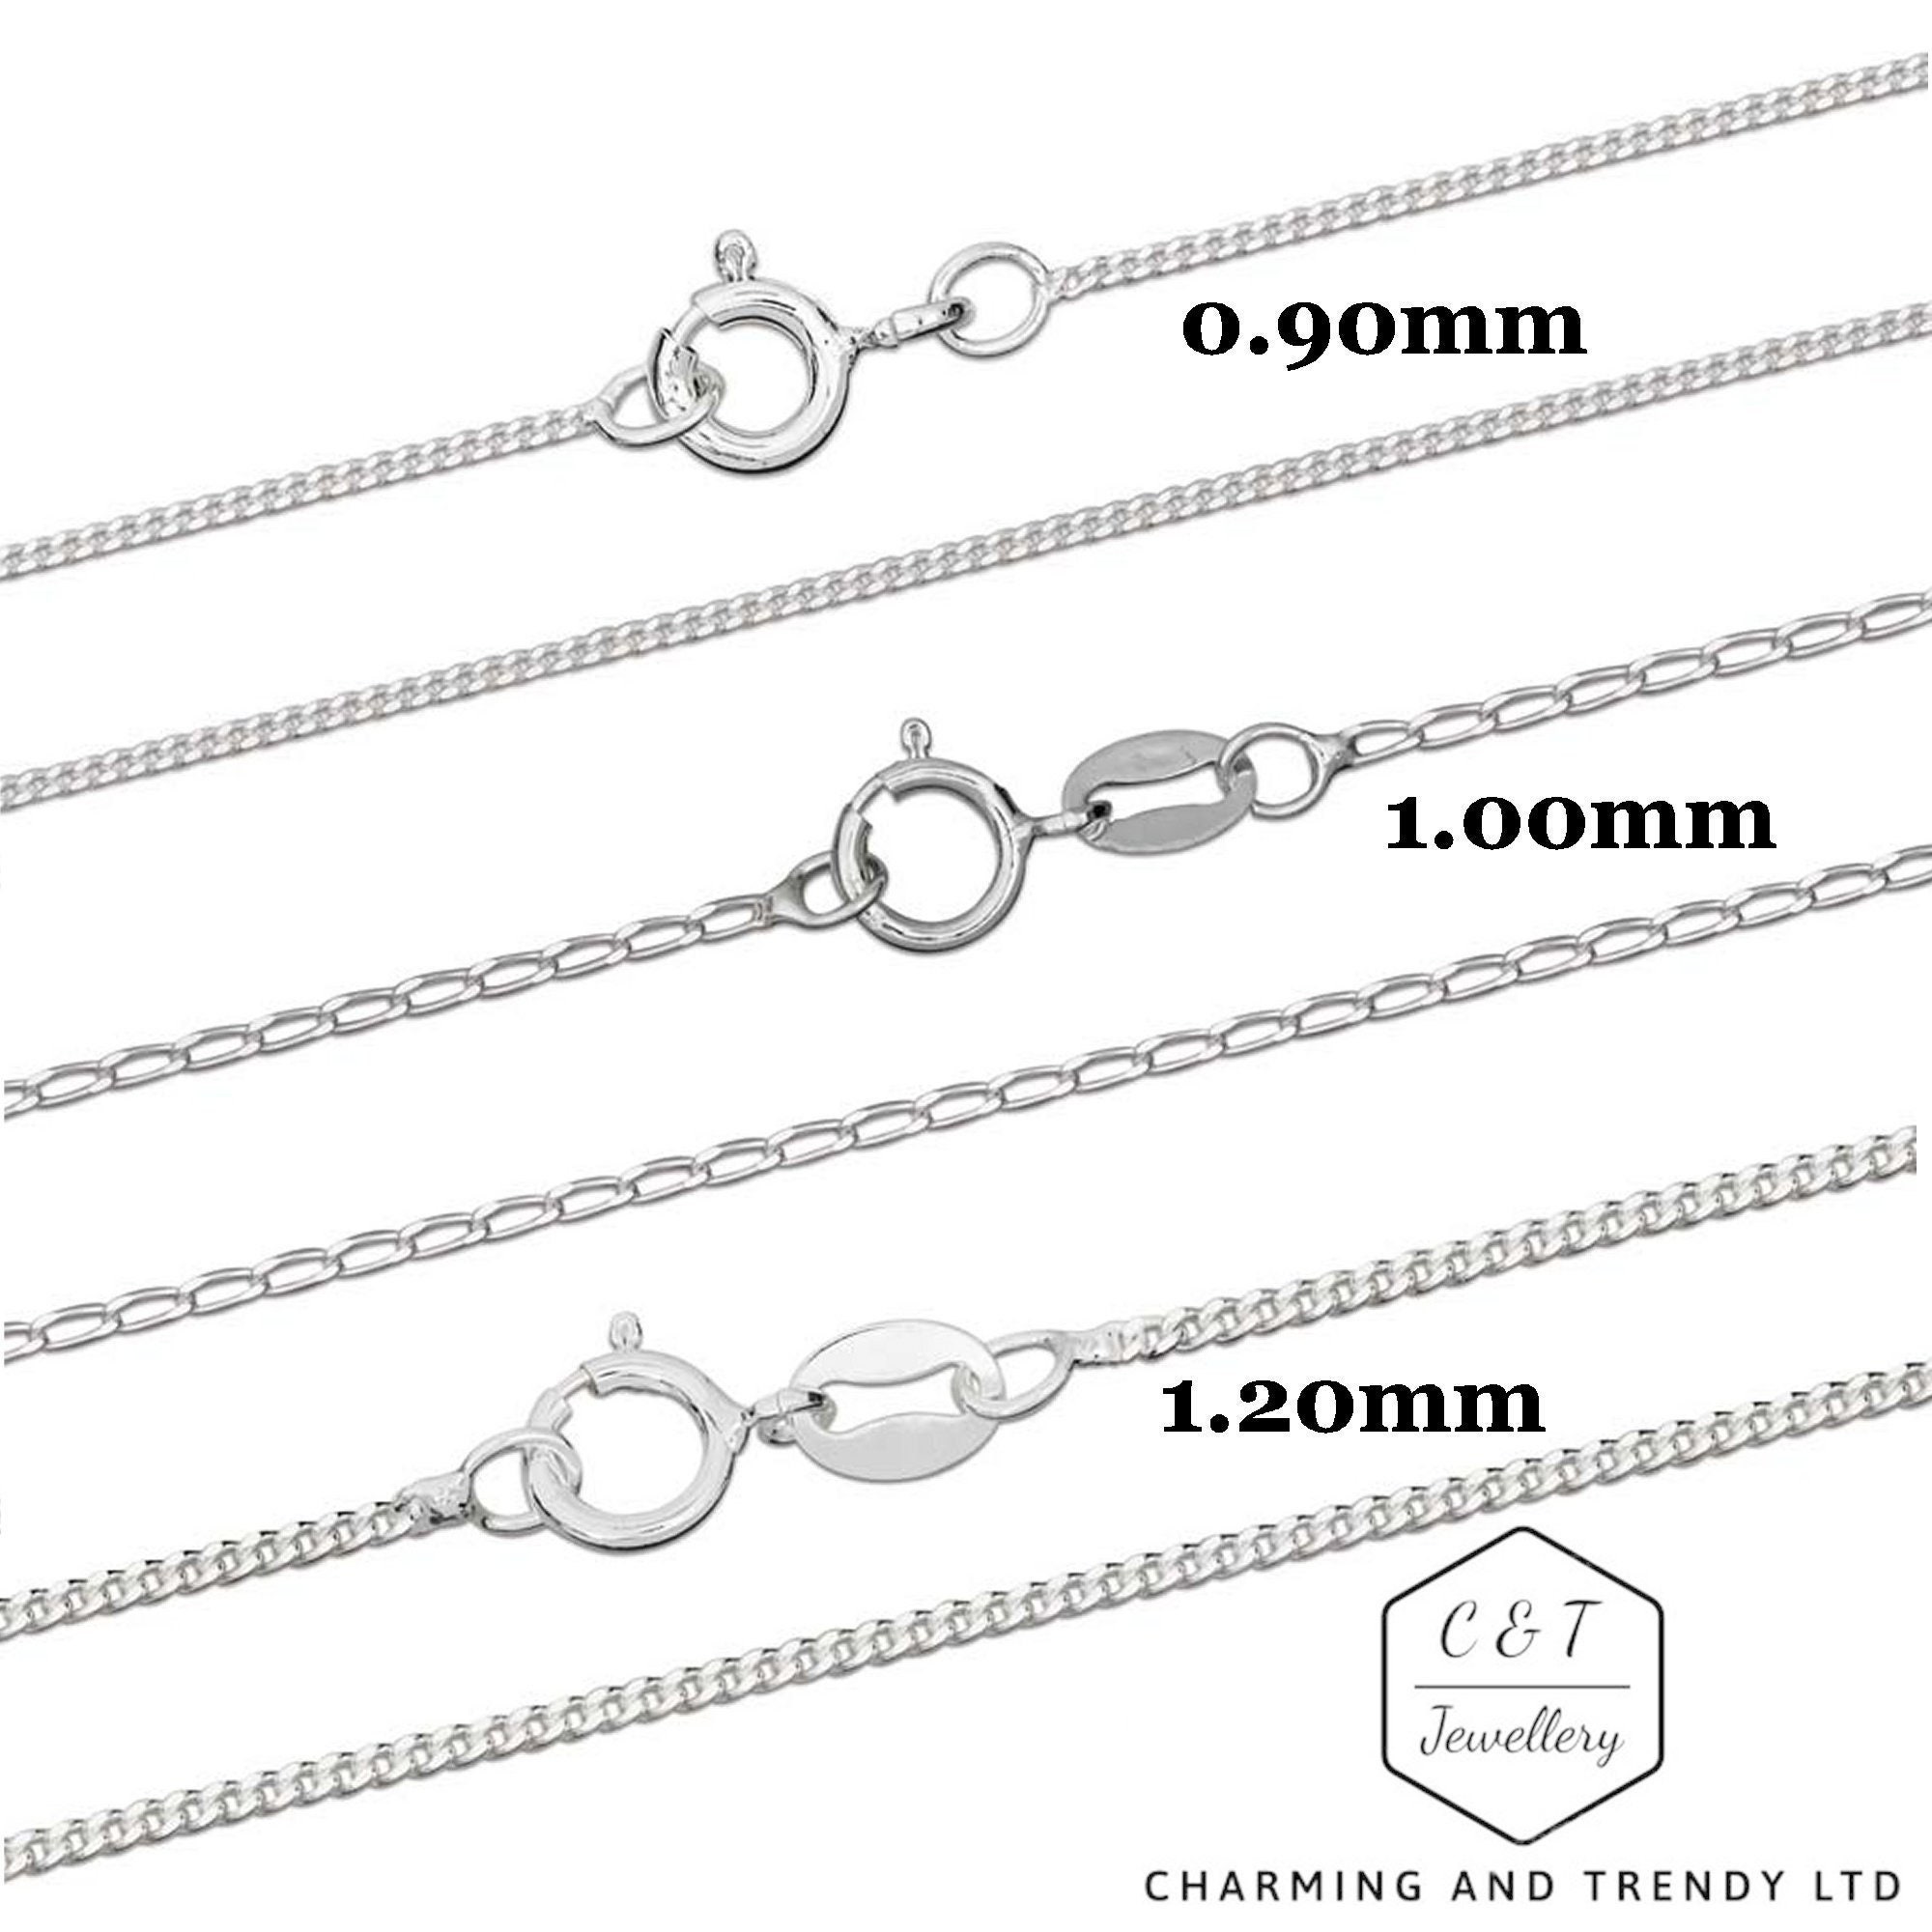 Sterling Silver 0.90mm Thin Delicate Cable Chain Necklace 24 or 30 Inches 18 20 16 